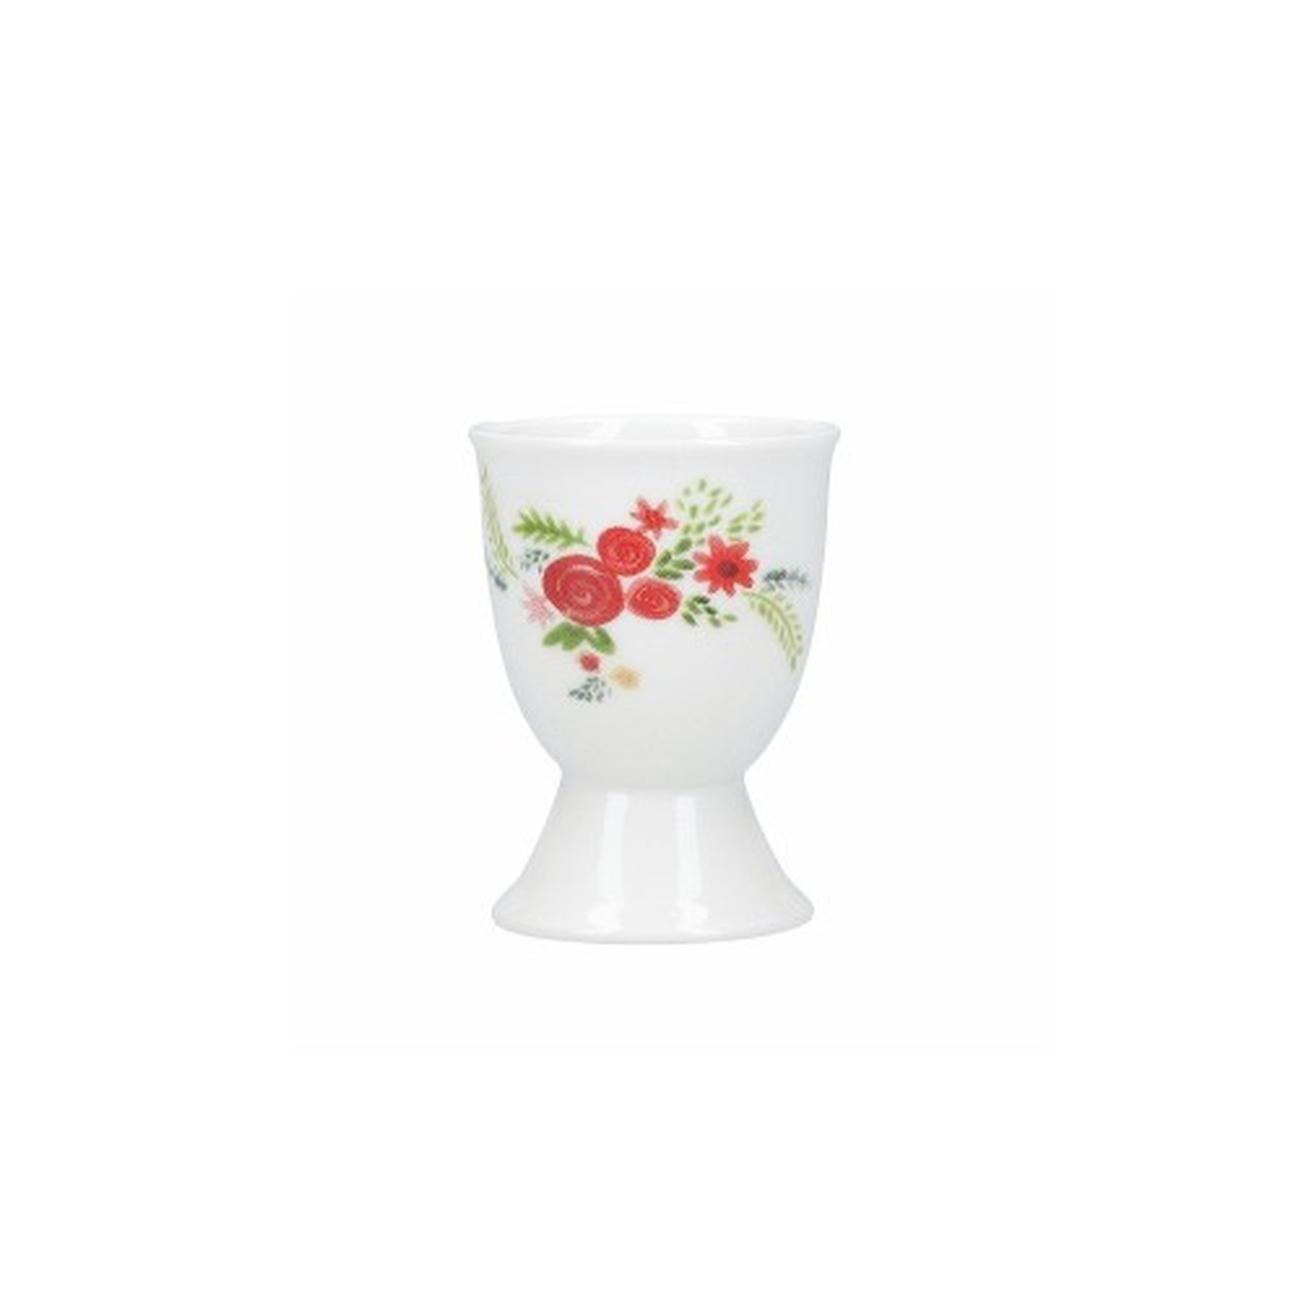 kitchencraft-porcelain-egg-cup-flowers - KitchenCraft Flowers Porcelain Egg Cup